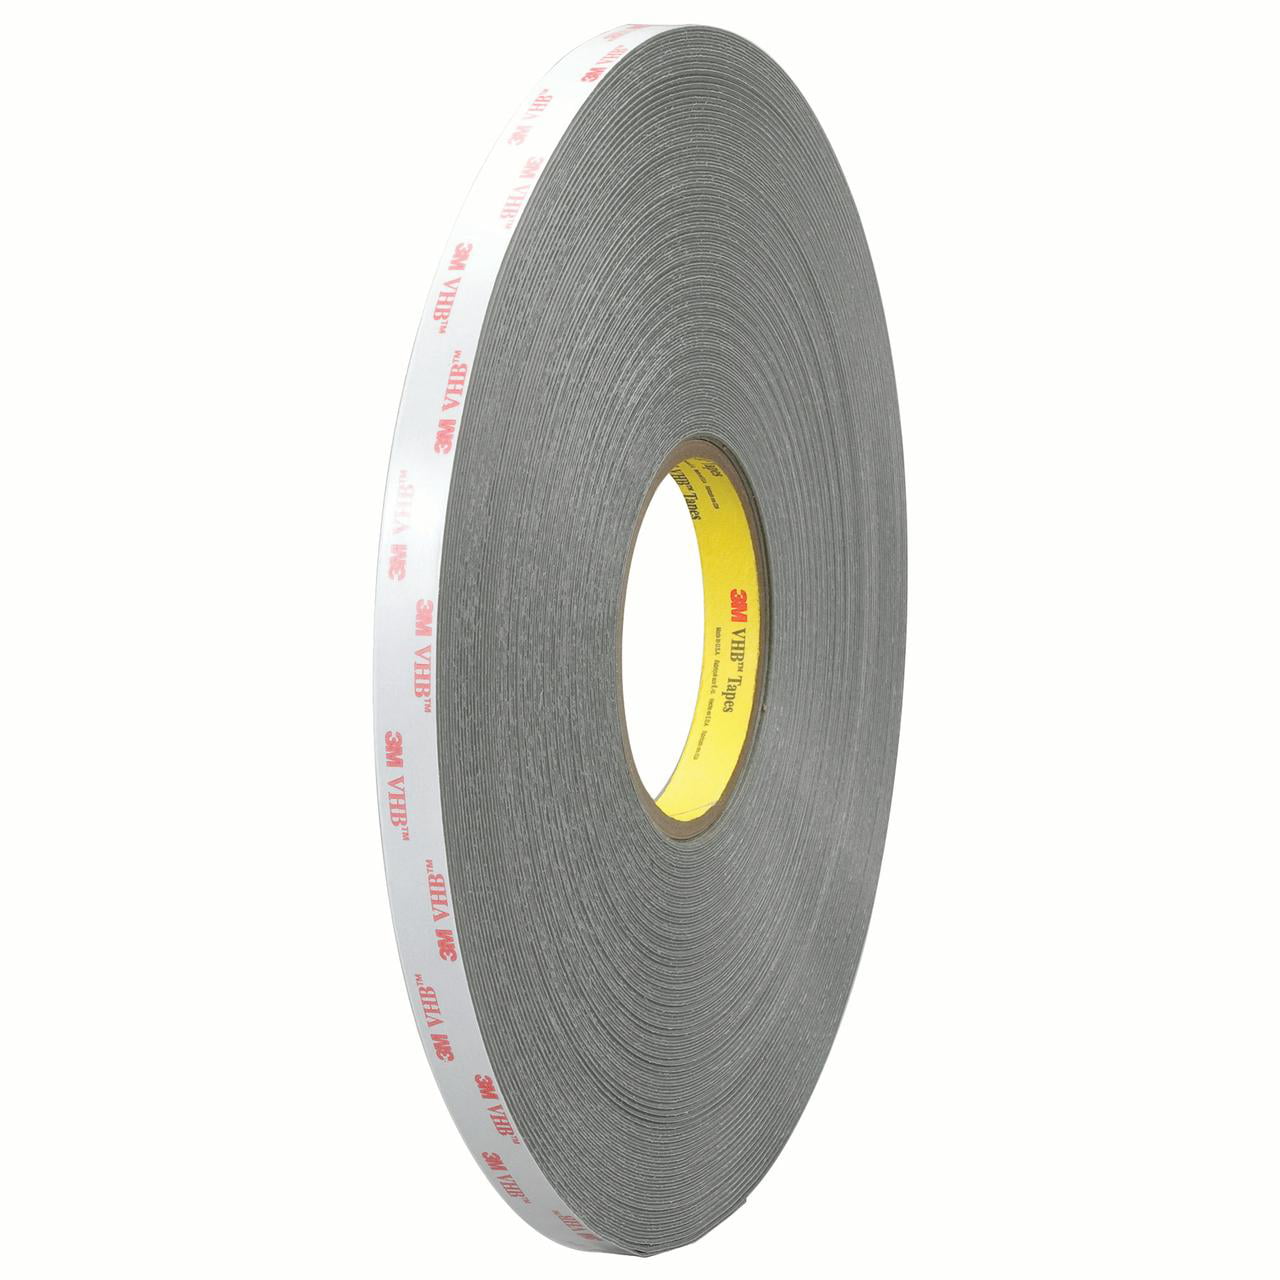 493612r 0.5 In. X 5 Yards Gray 3m 4936 Tape